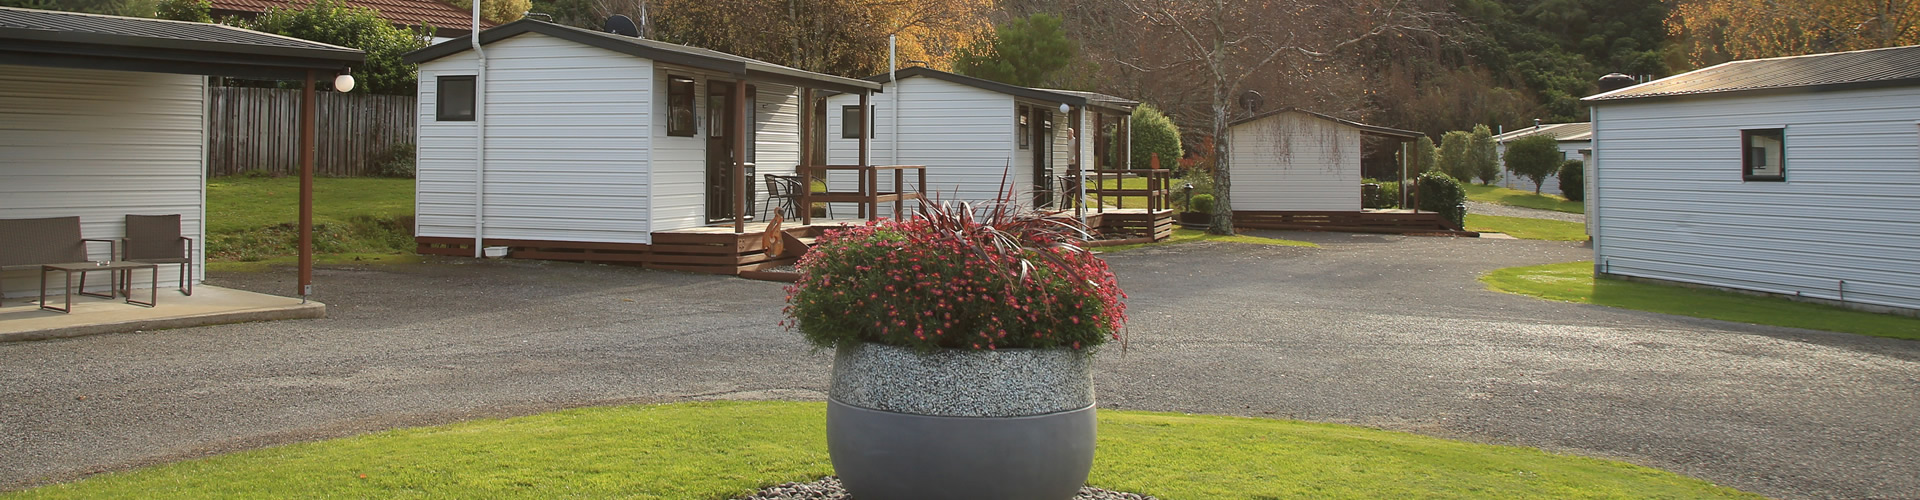 Cabin Accommodation At Parklands Marina Holiday Park In Picton